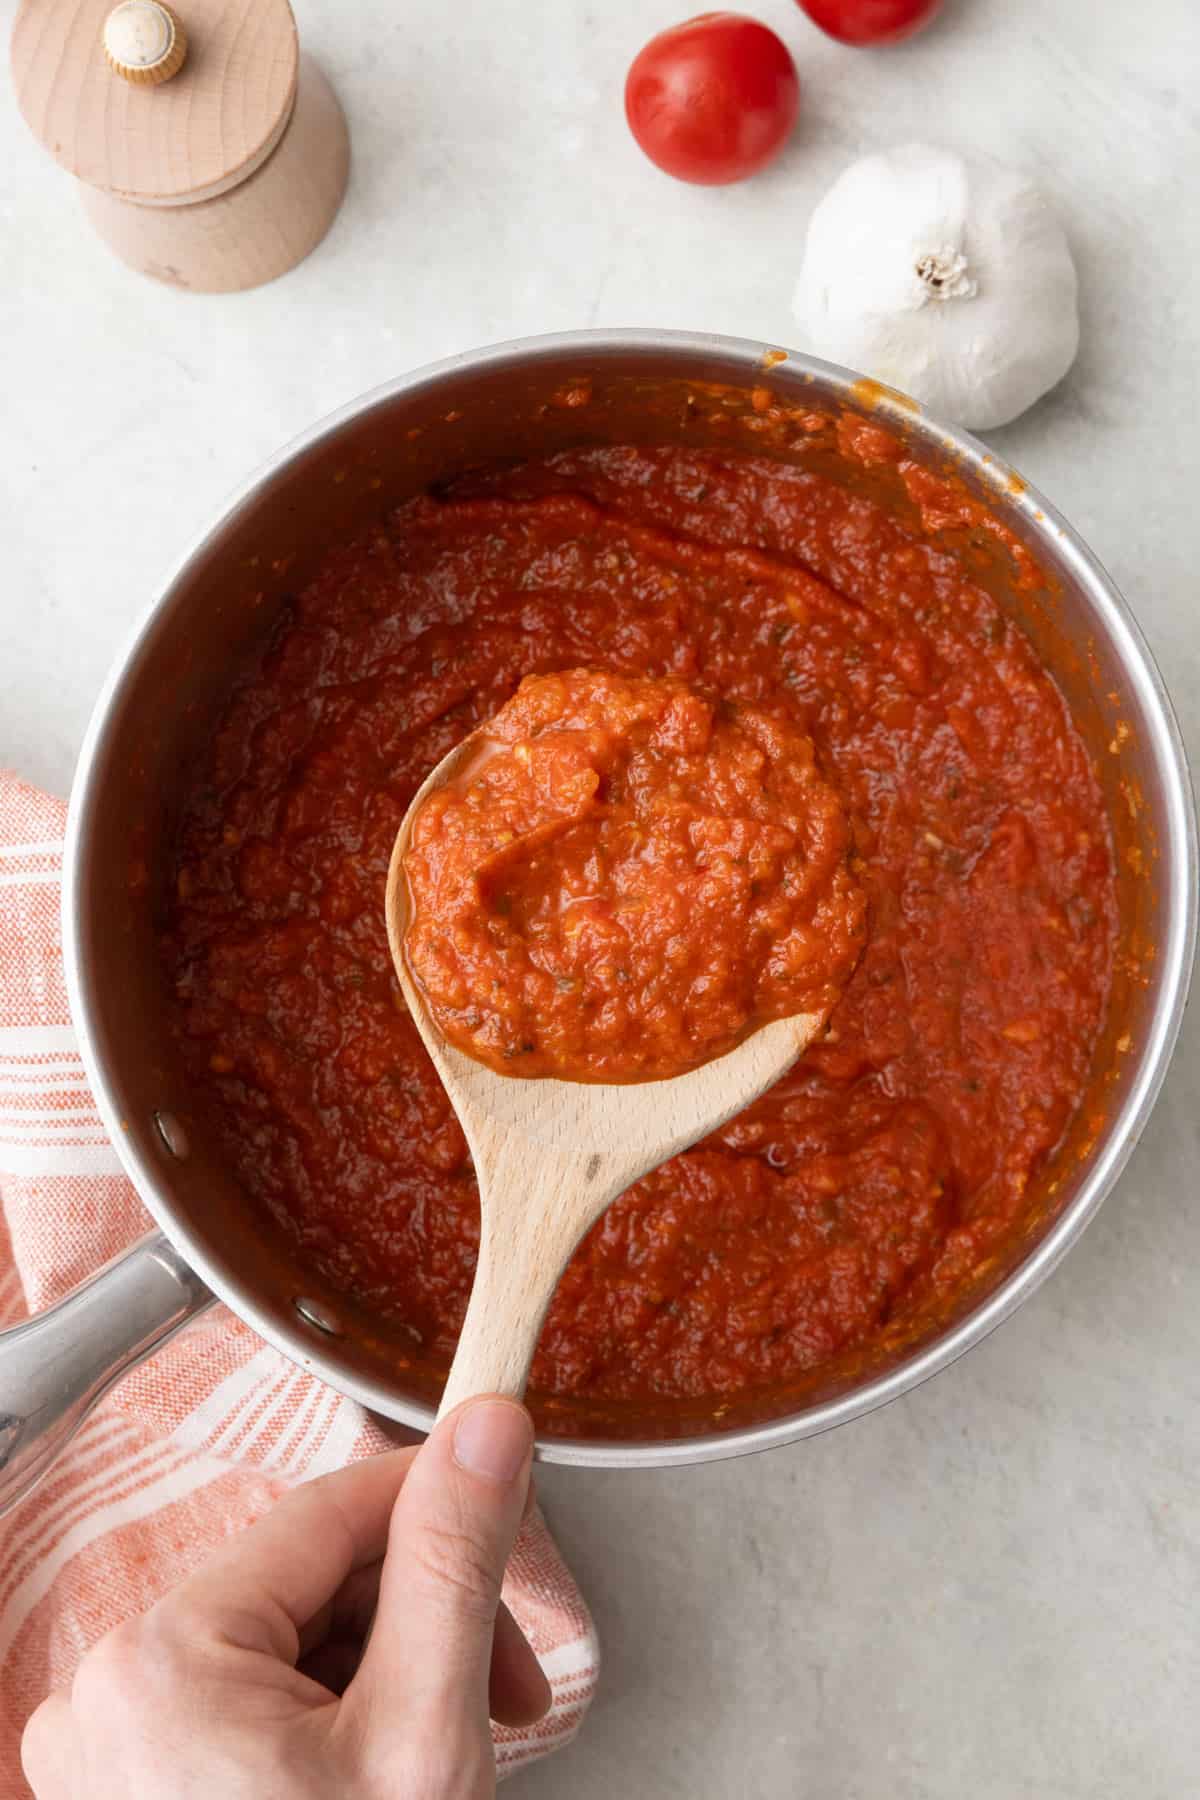 Spoon lifting up some pizza sauce from pot.